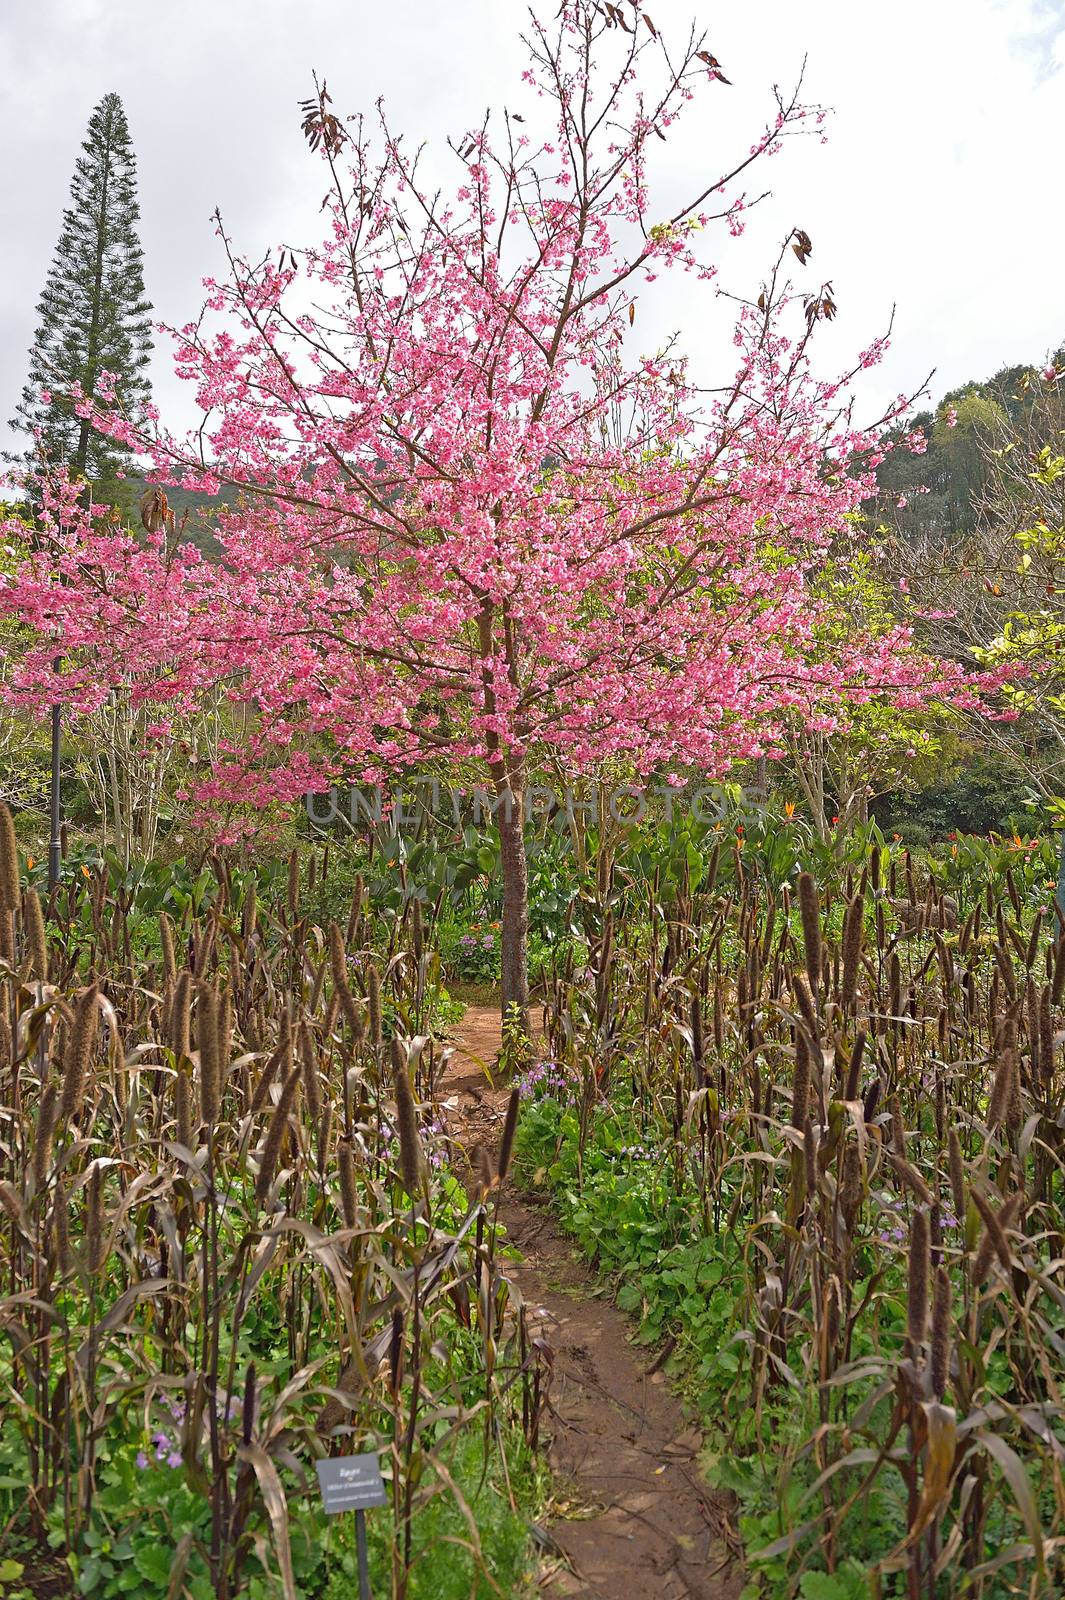 Himalayan Cherry (Prunus cerasoides) blooming at Doi Angkhang, T by think4photop